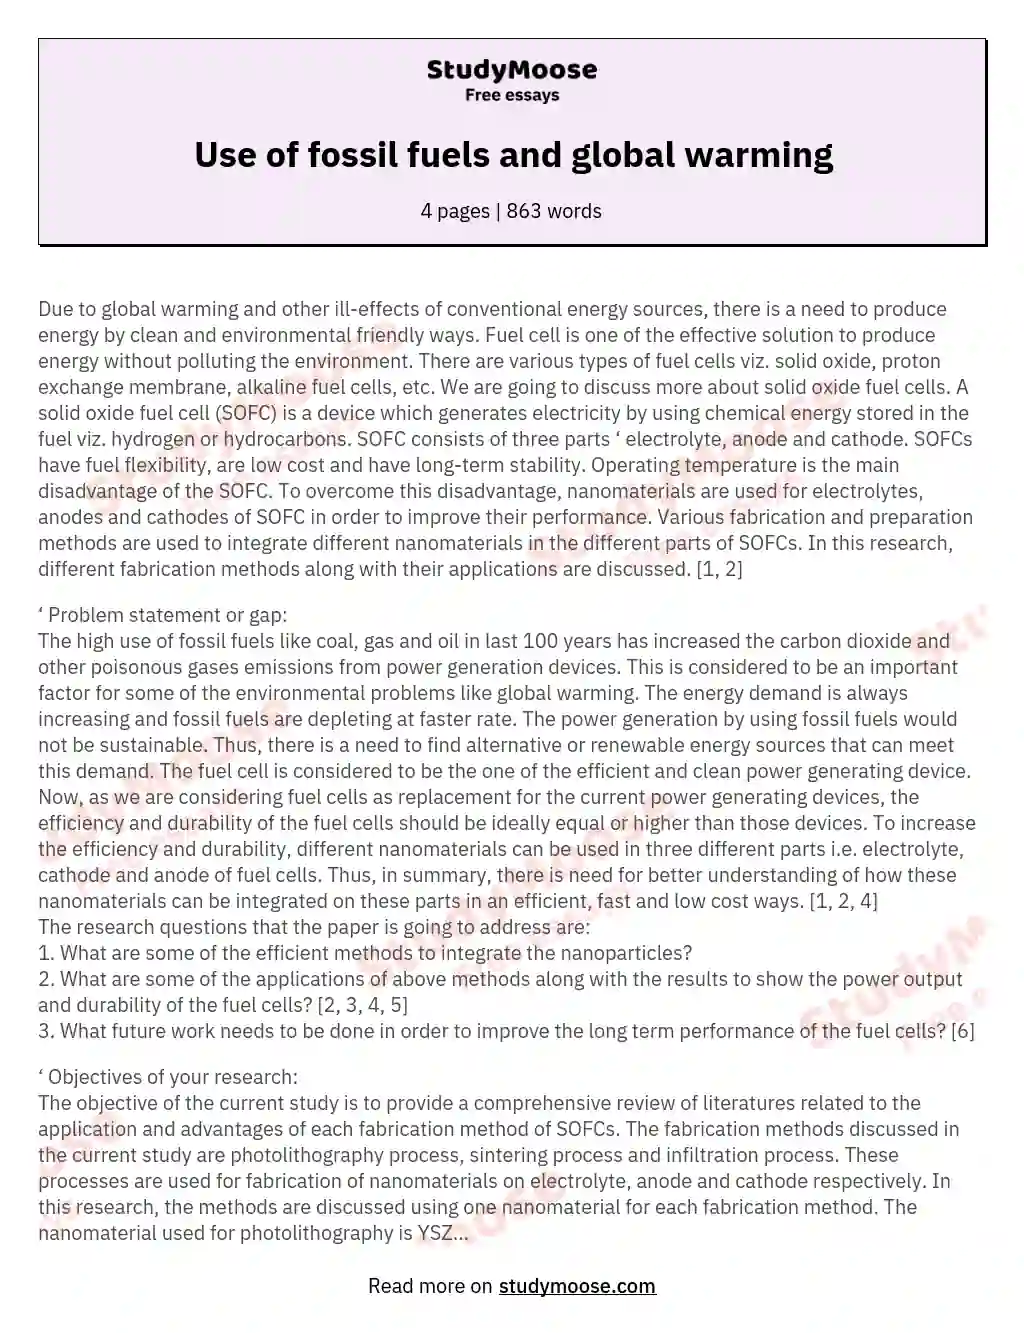 Use of fossil fuels and global warming essay